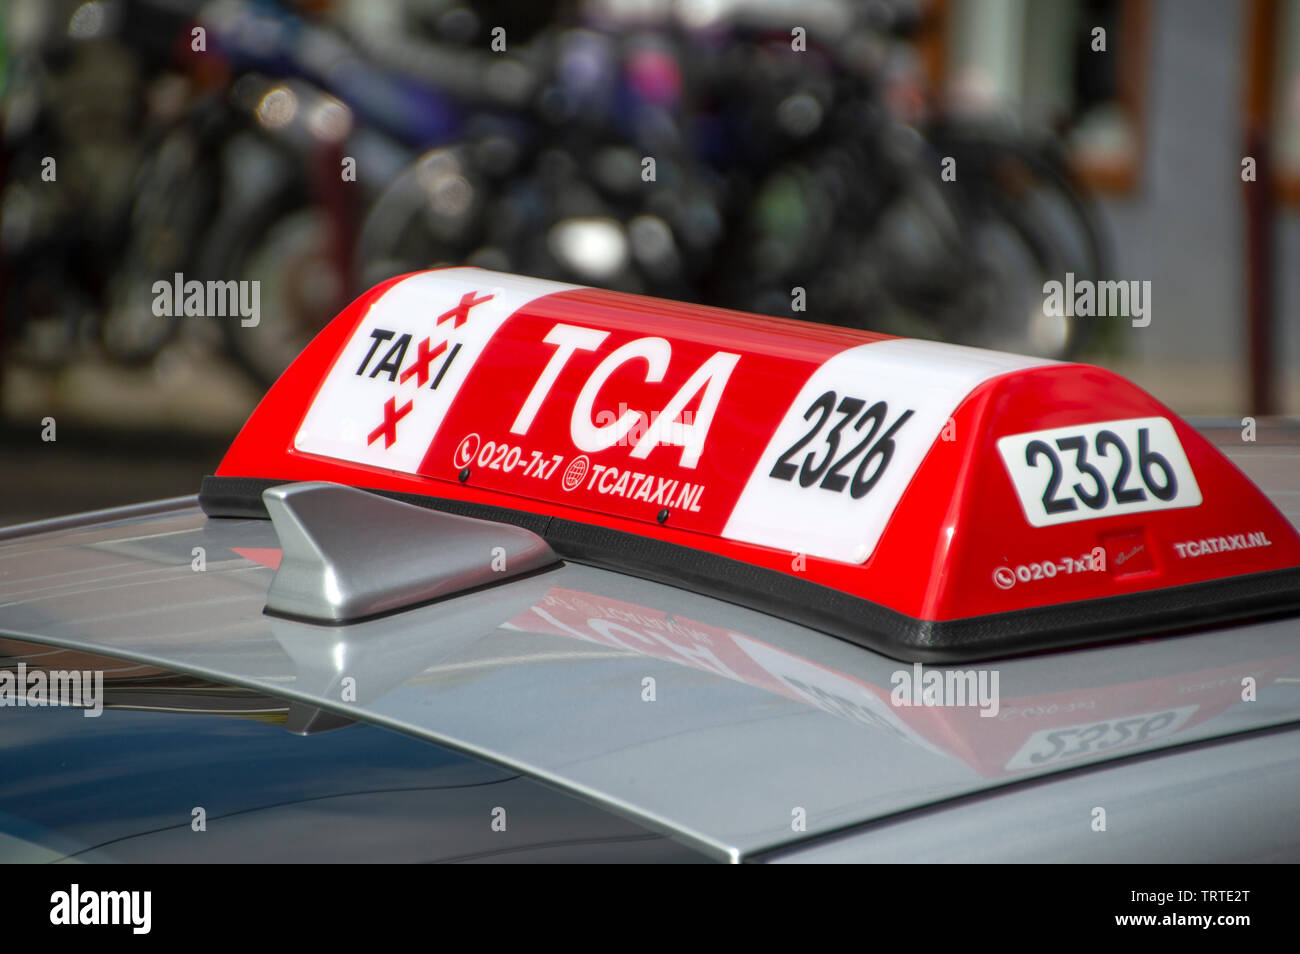 Close Up Of A TCA Taxi At Amsterdam The Netherlands 2019 Stock Photo